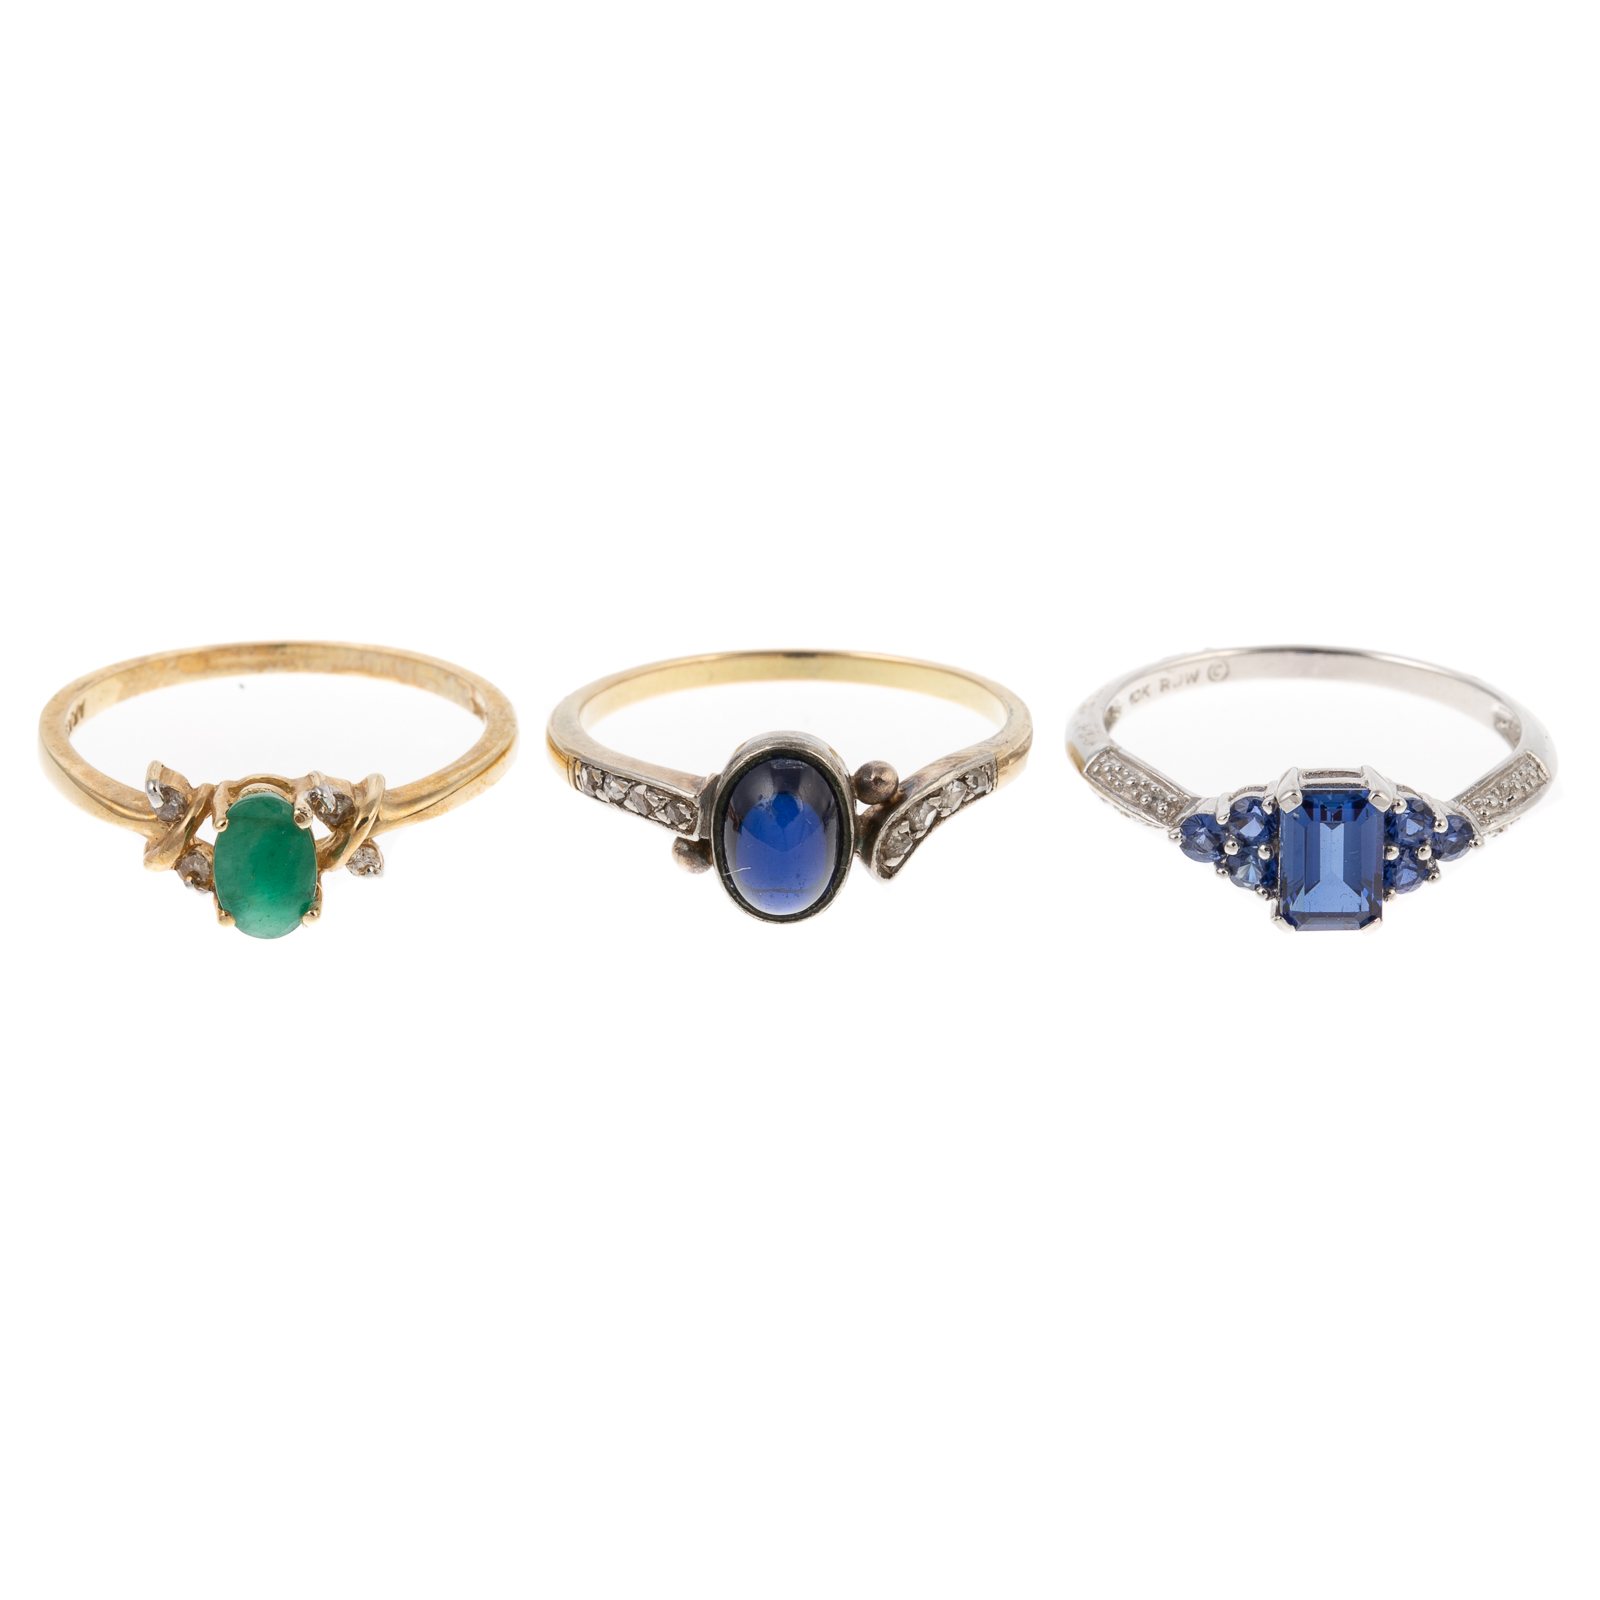 A COLLECTION OF THREE GEMSTONE